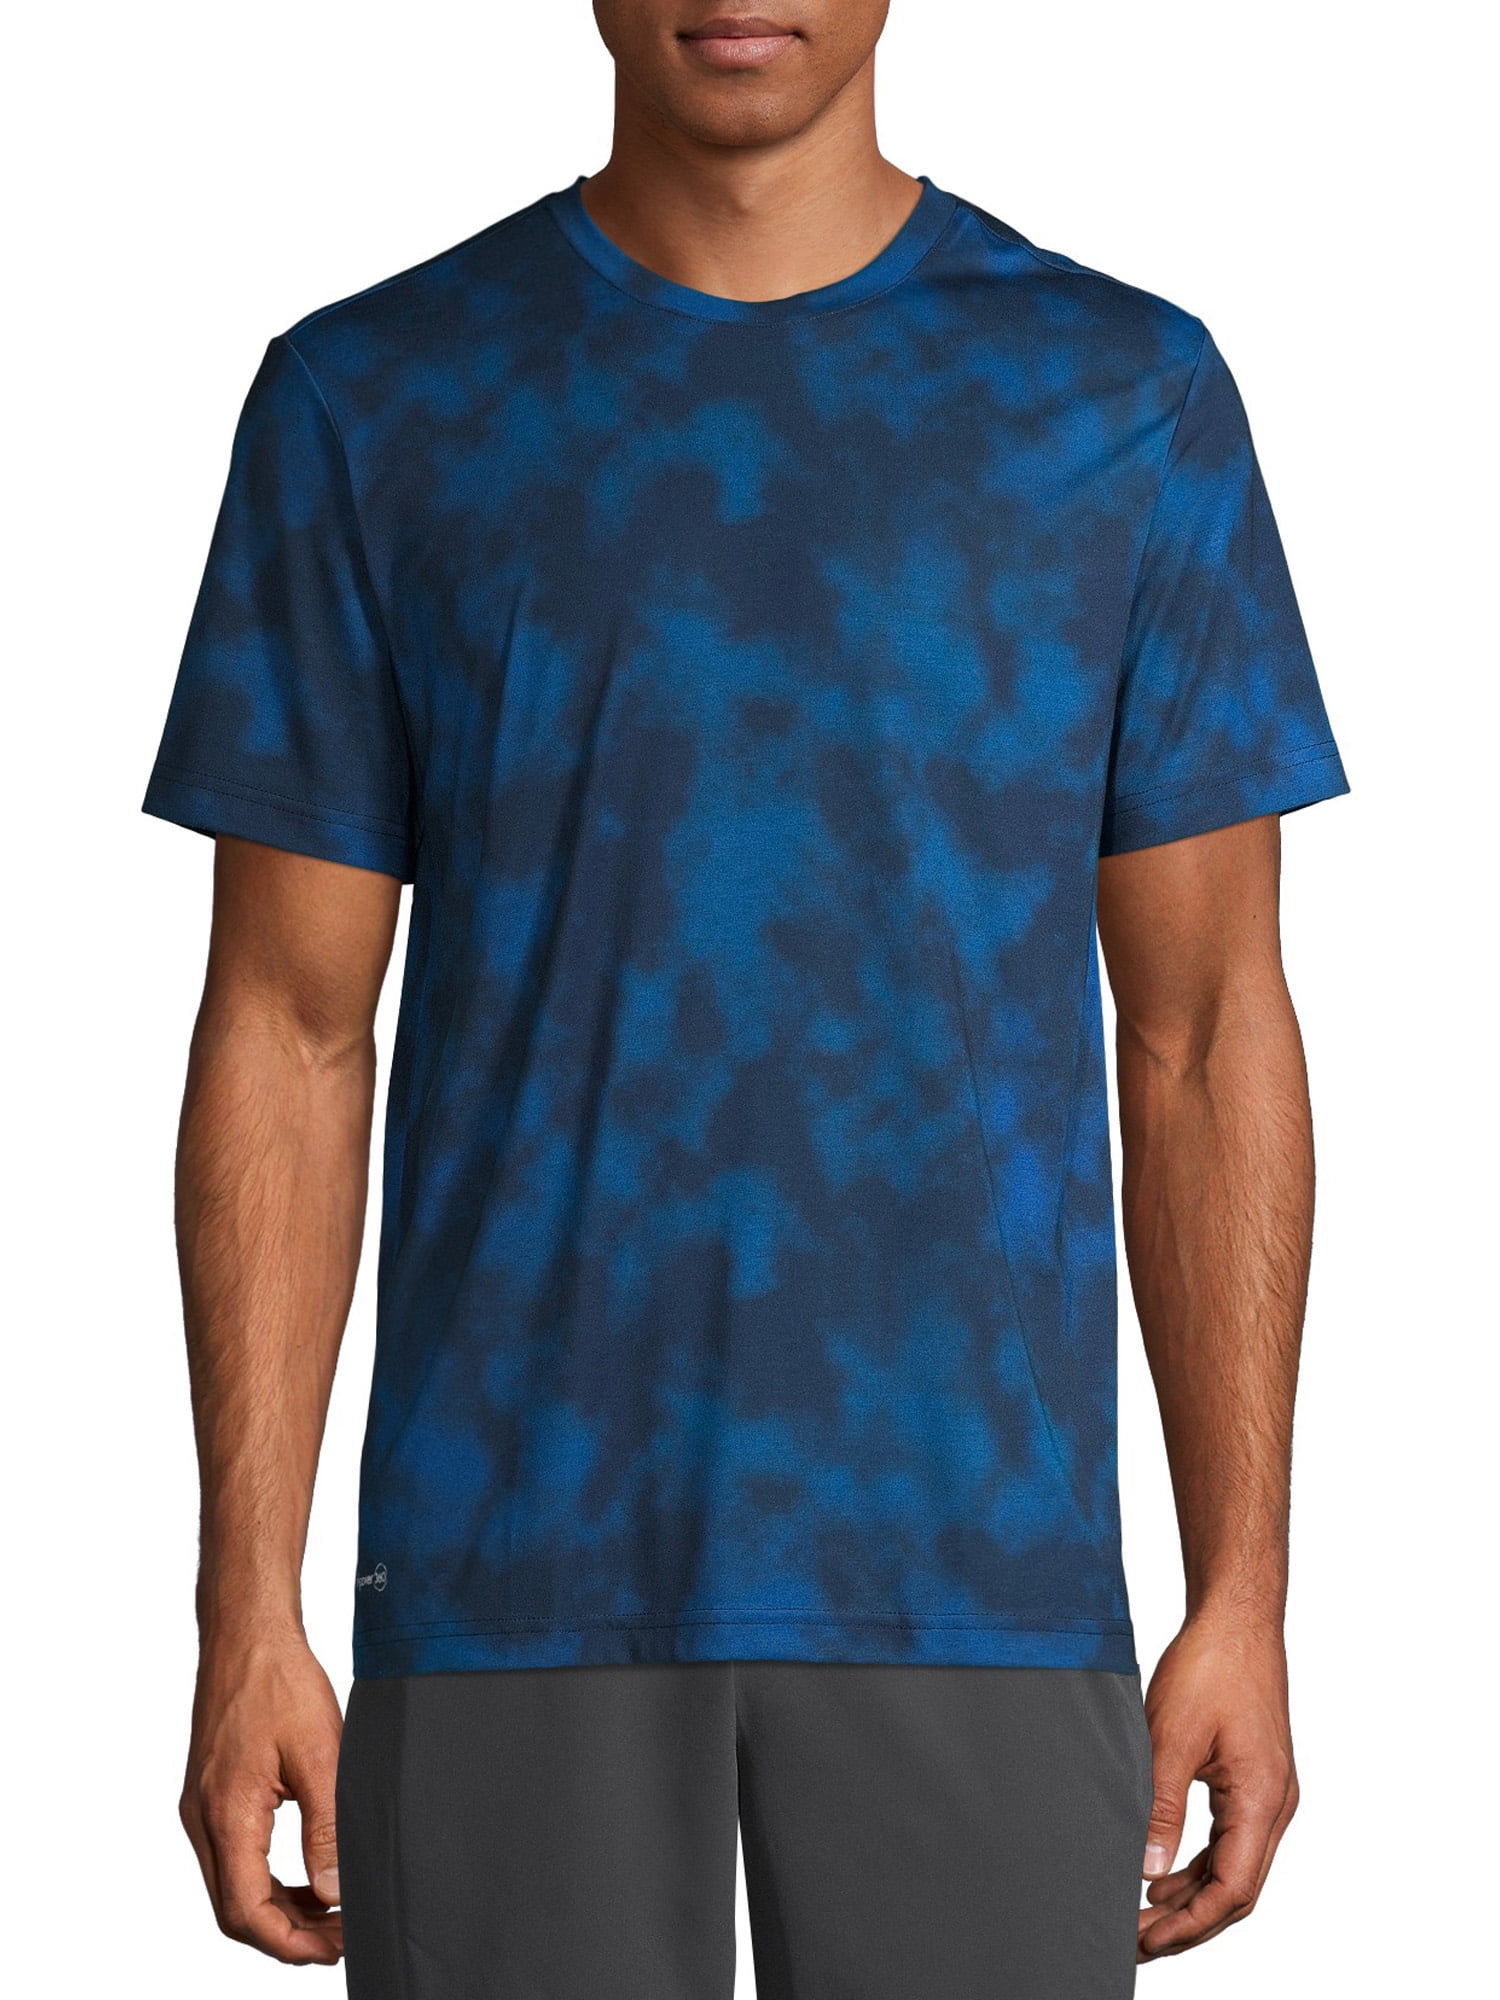 Russell - Russell Men's and Big Men's Active Tie Dye Crewneck T-Shirt ...